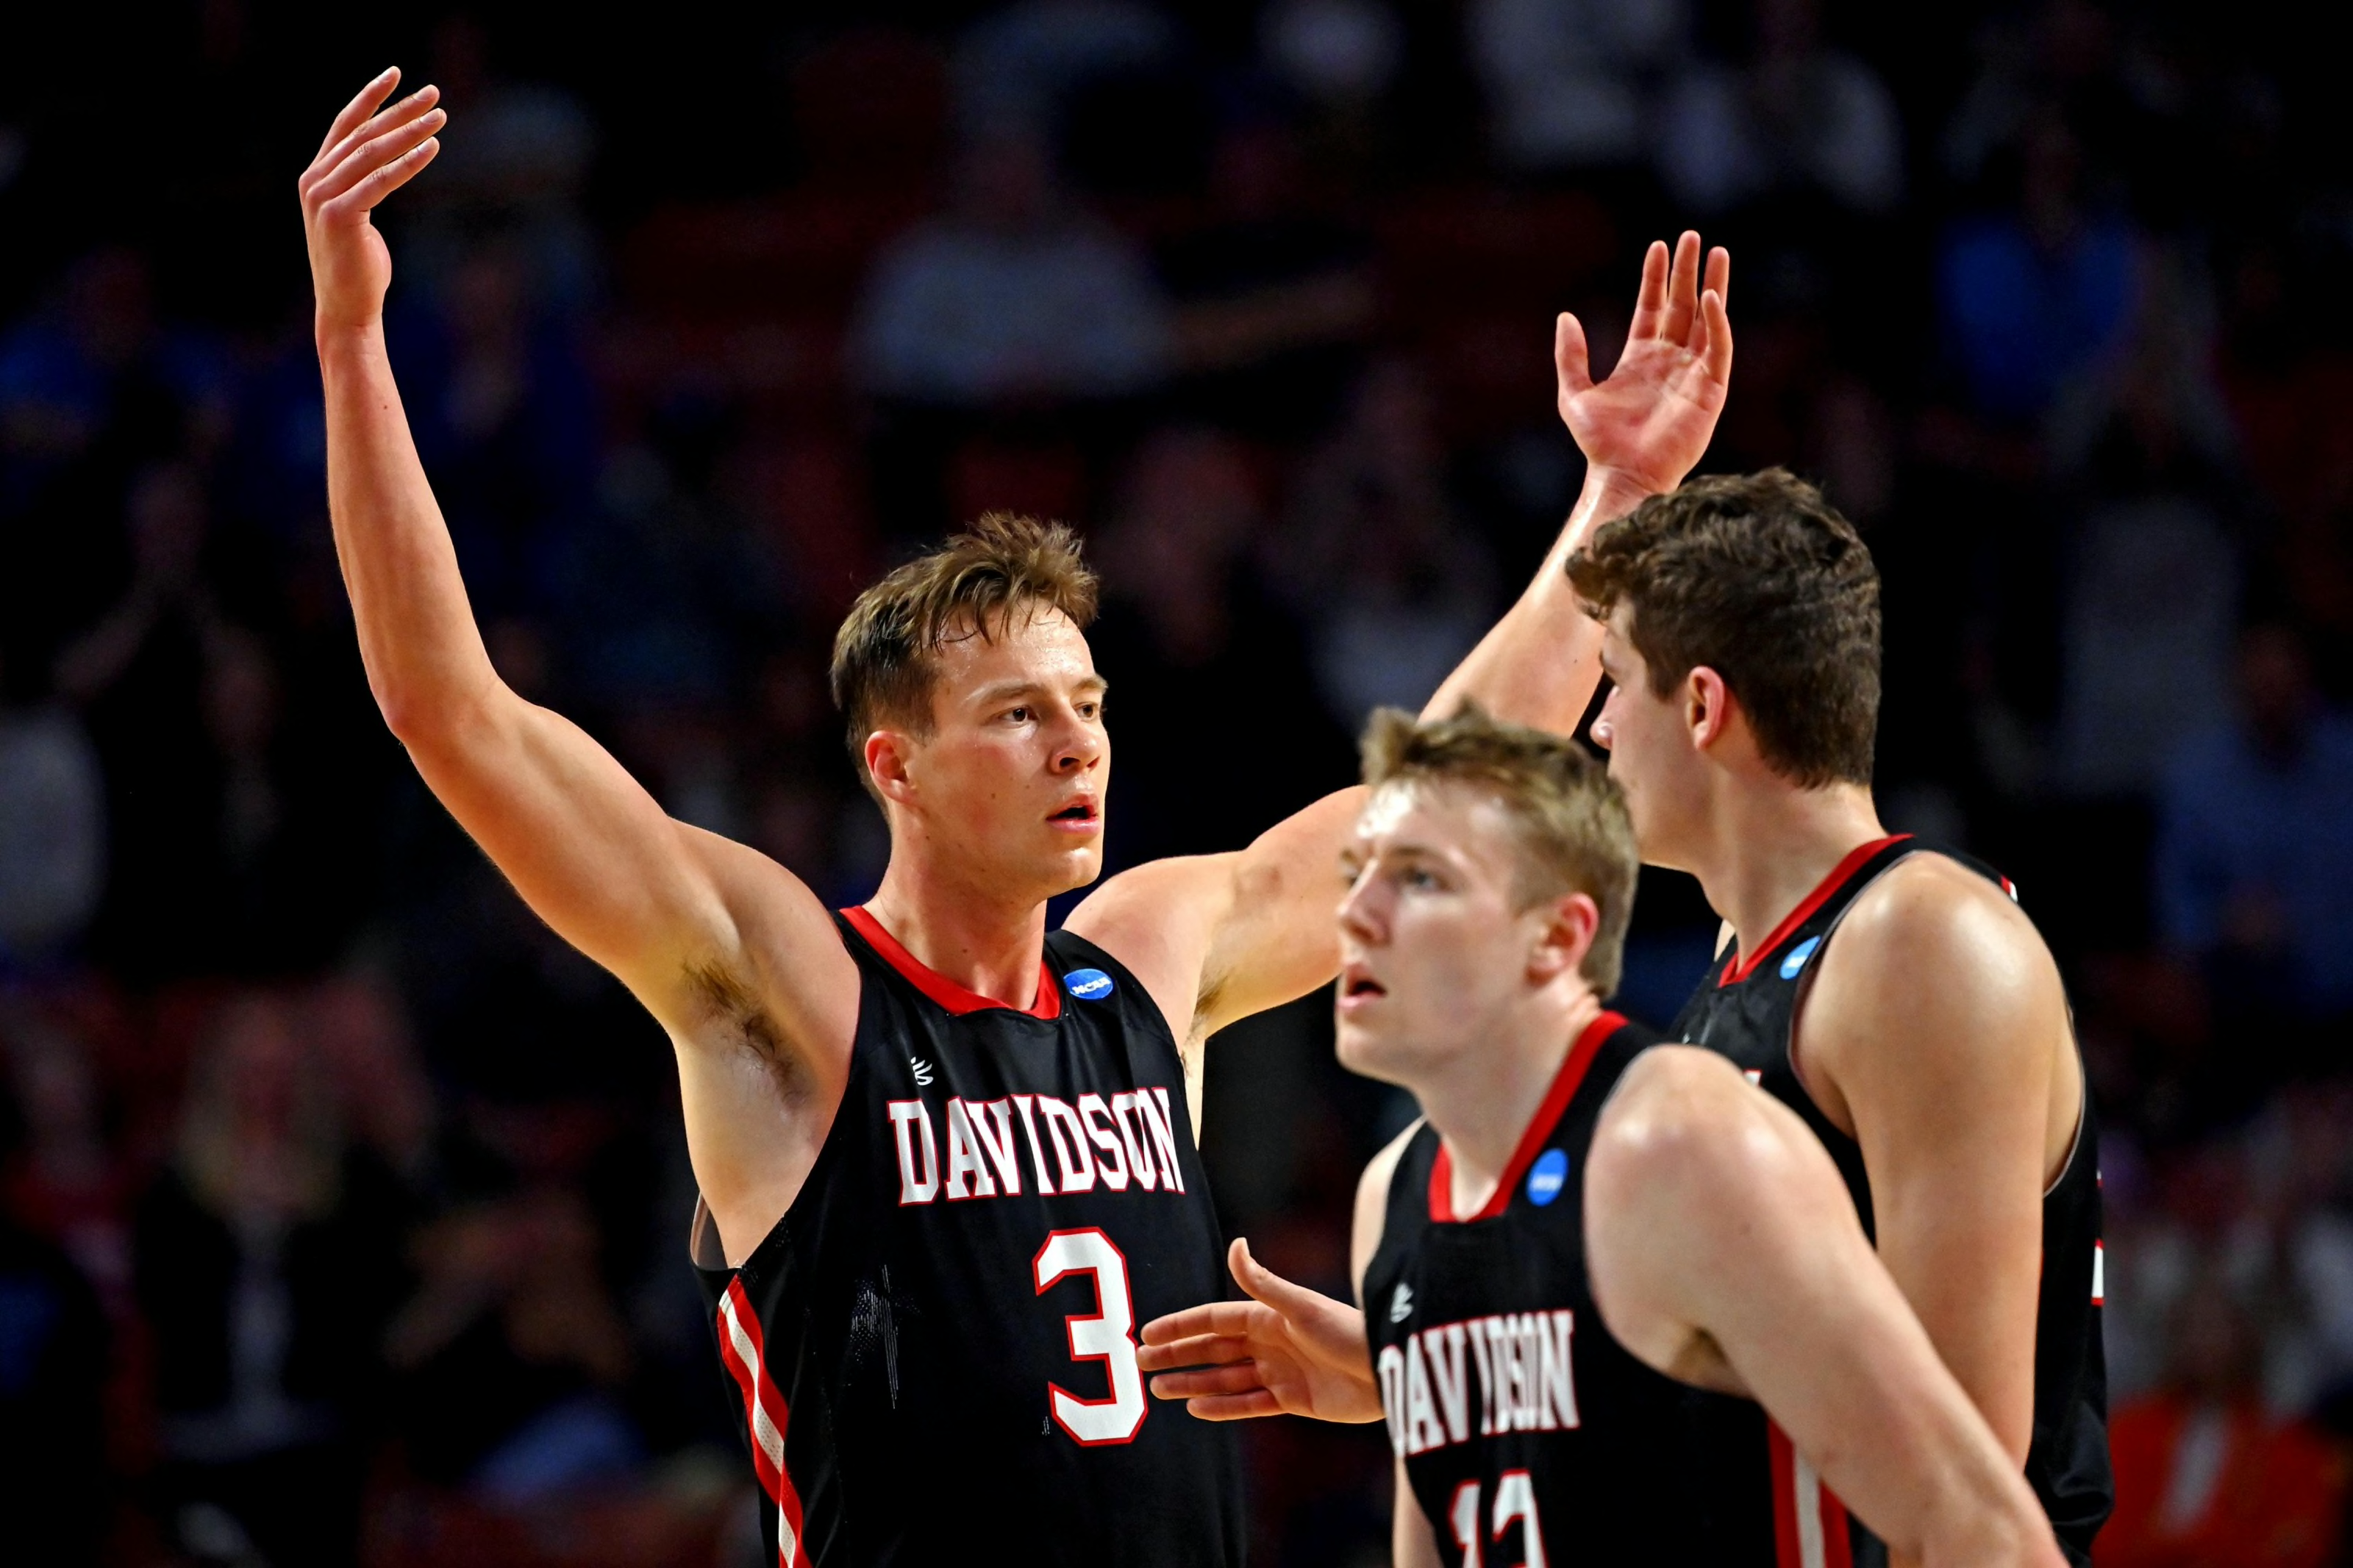 Atlantic 10 Officially Welcomes Davidson College - Atlantic 10